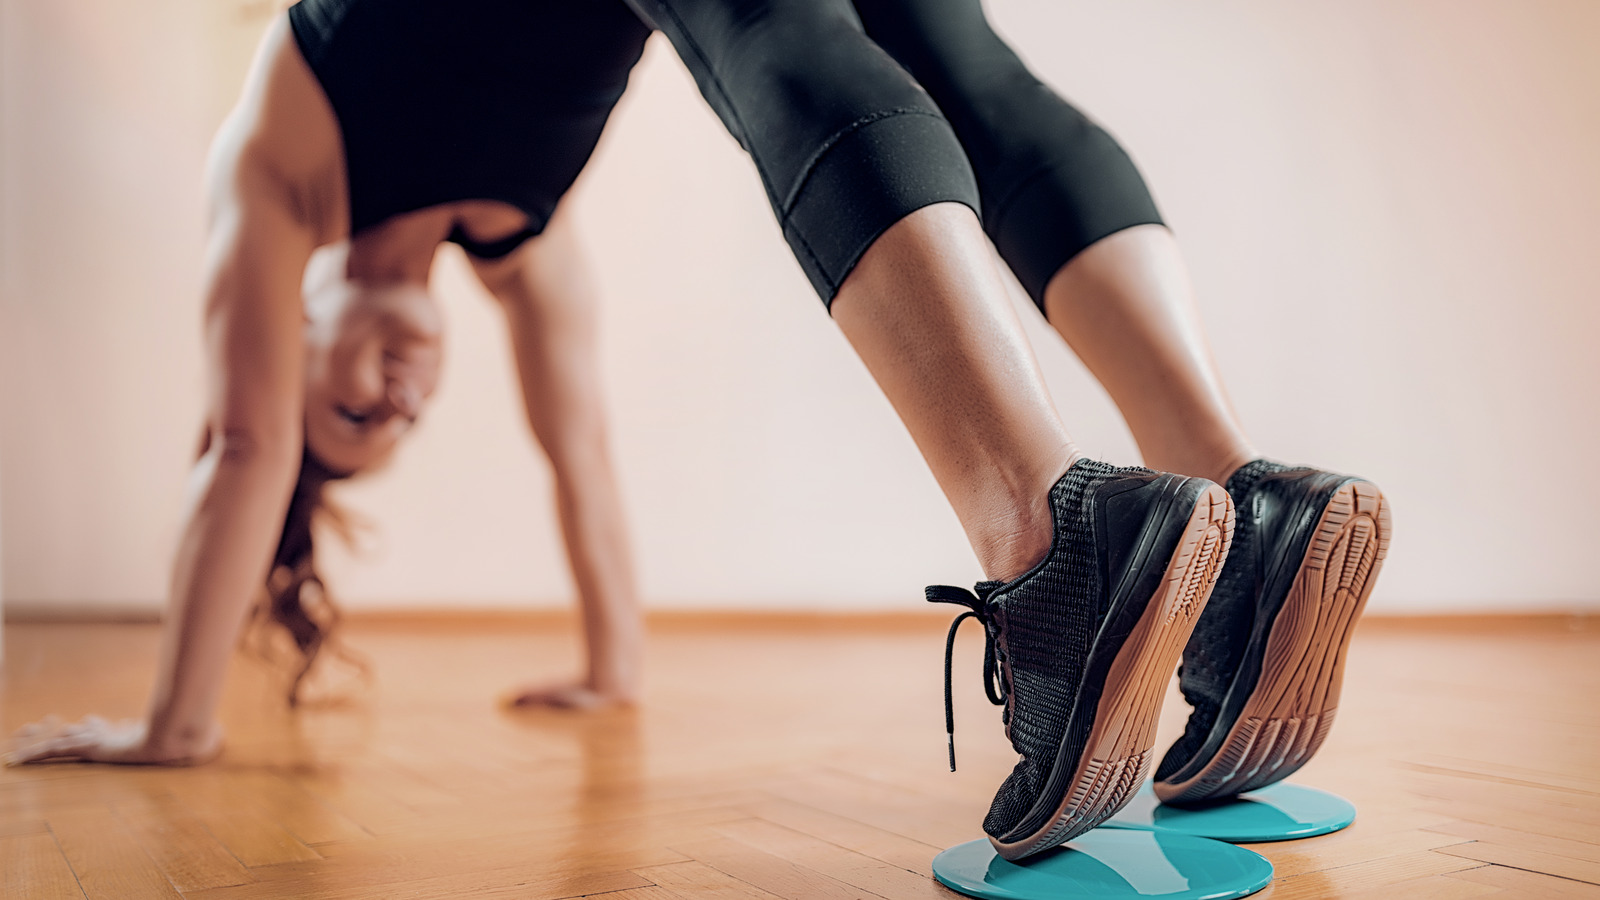 Sliders improve your balance and core strength by targeting the same m, Pilates